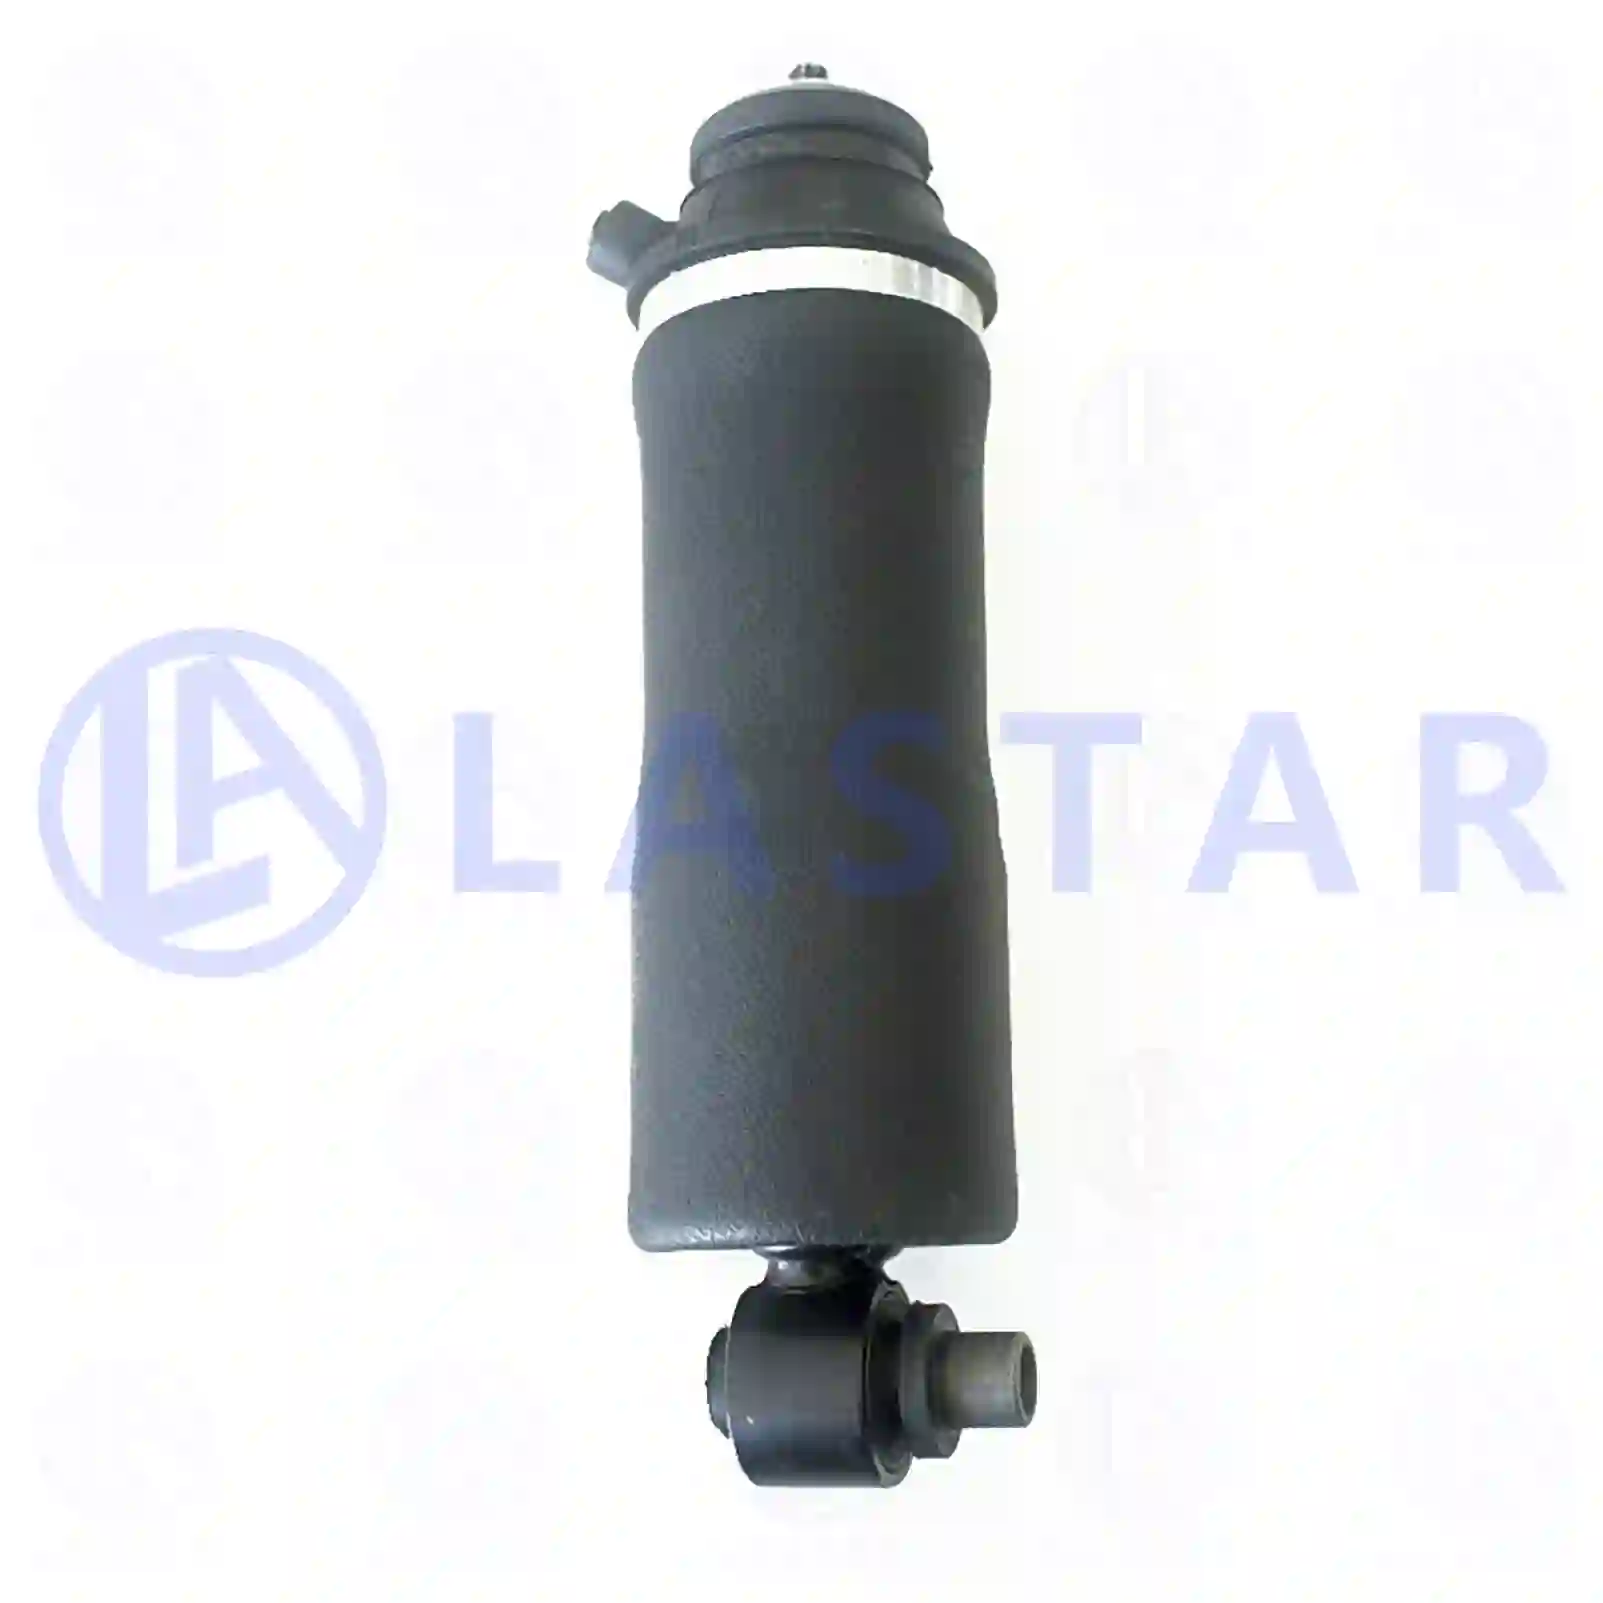 Cabin shock absorber, with air bellow, 77735126, 7421170696, 21430900, , , ||  77735126 Lastar Spare Part | Truck Spare Parts, Auotomotive Spare Parts Cabin shock absorber, with air bellow, 77735126, 7421170696, 21430900, , , ||  77735126 Lastar Spare Part | Truck Spare Parts, Auotomotive Spare Parts